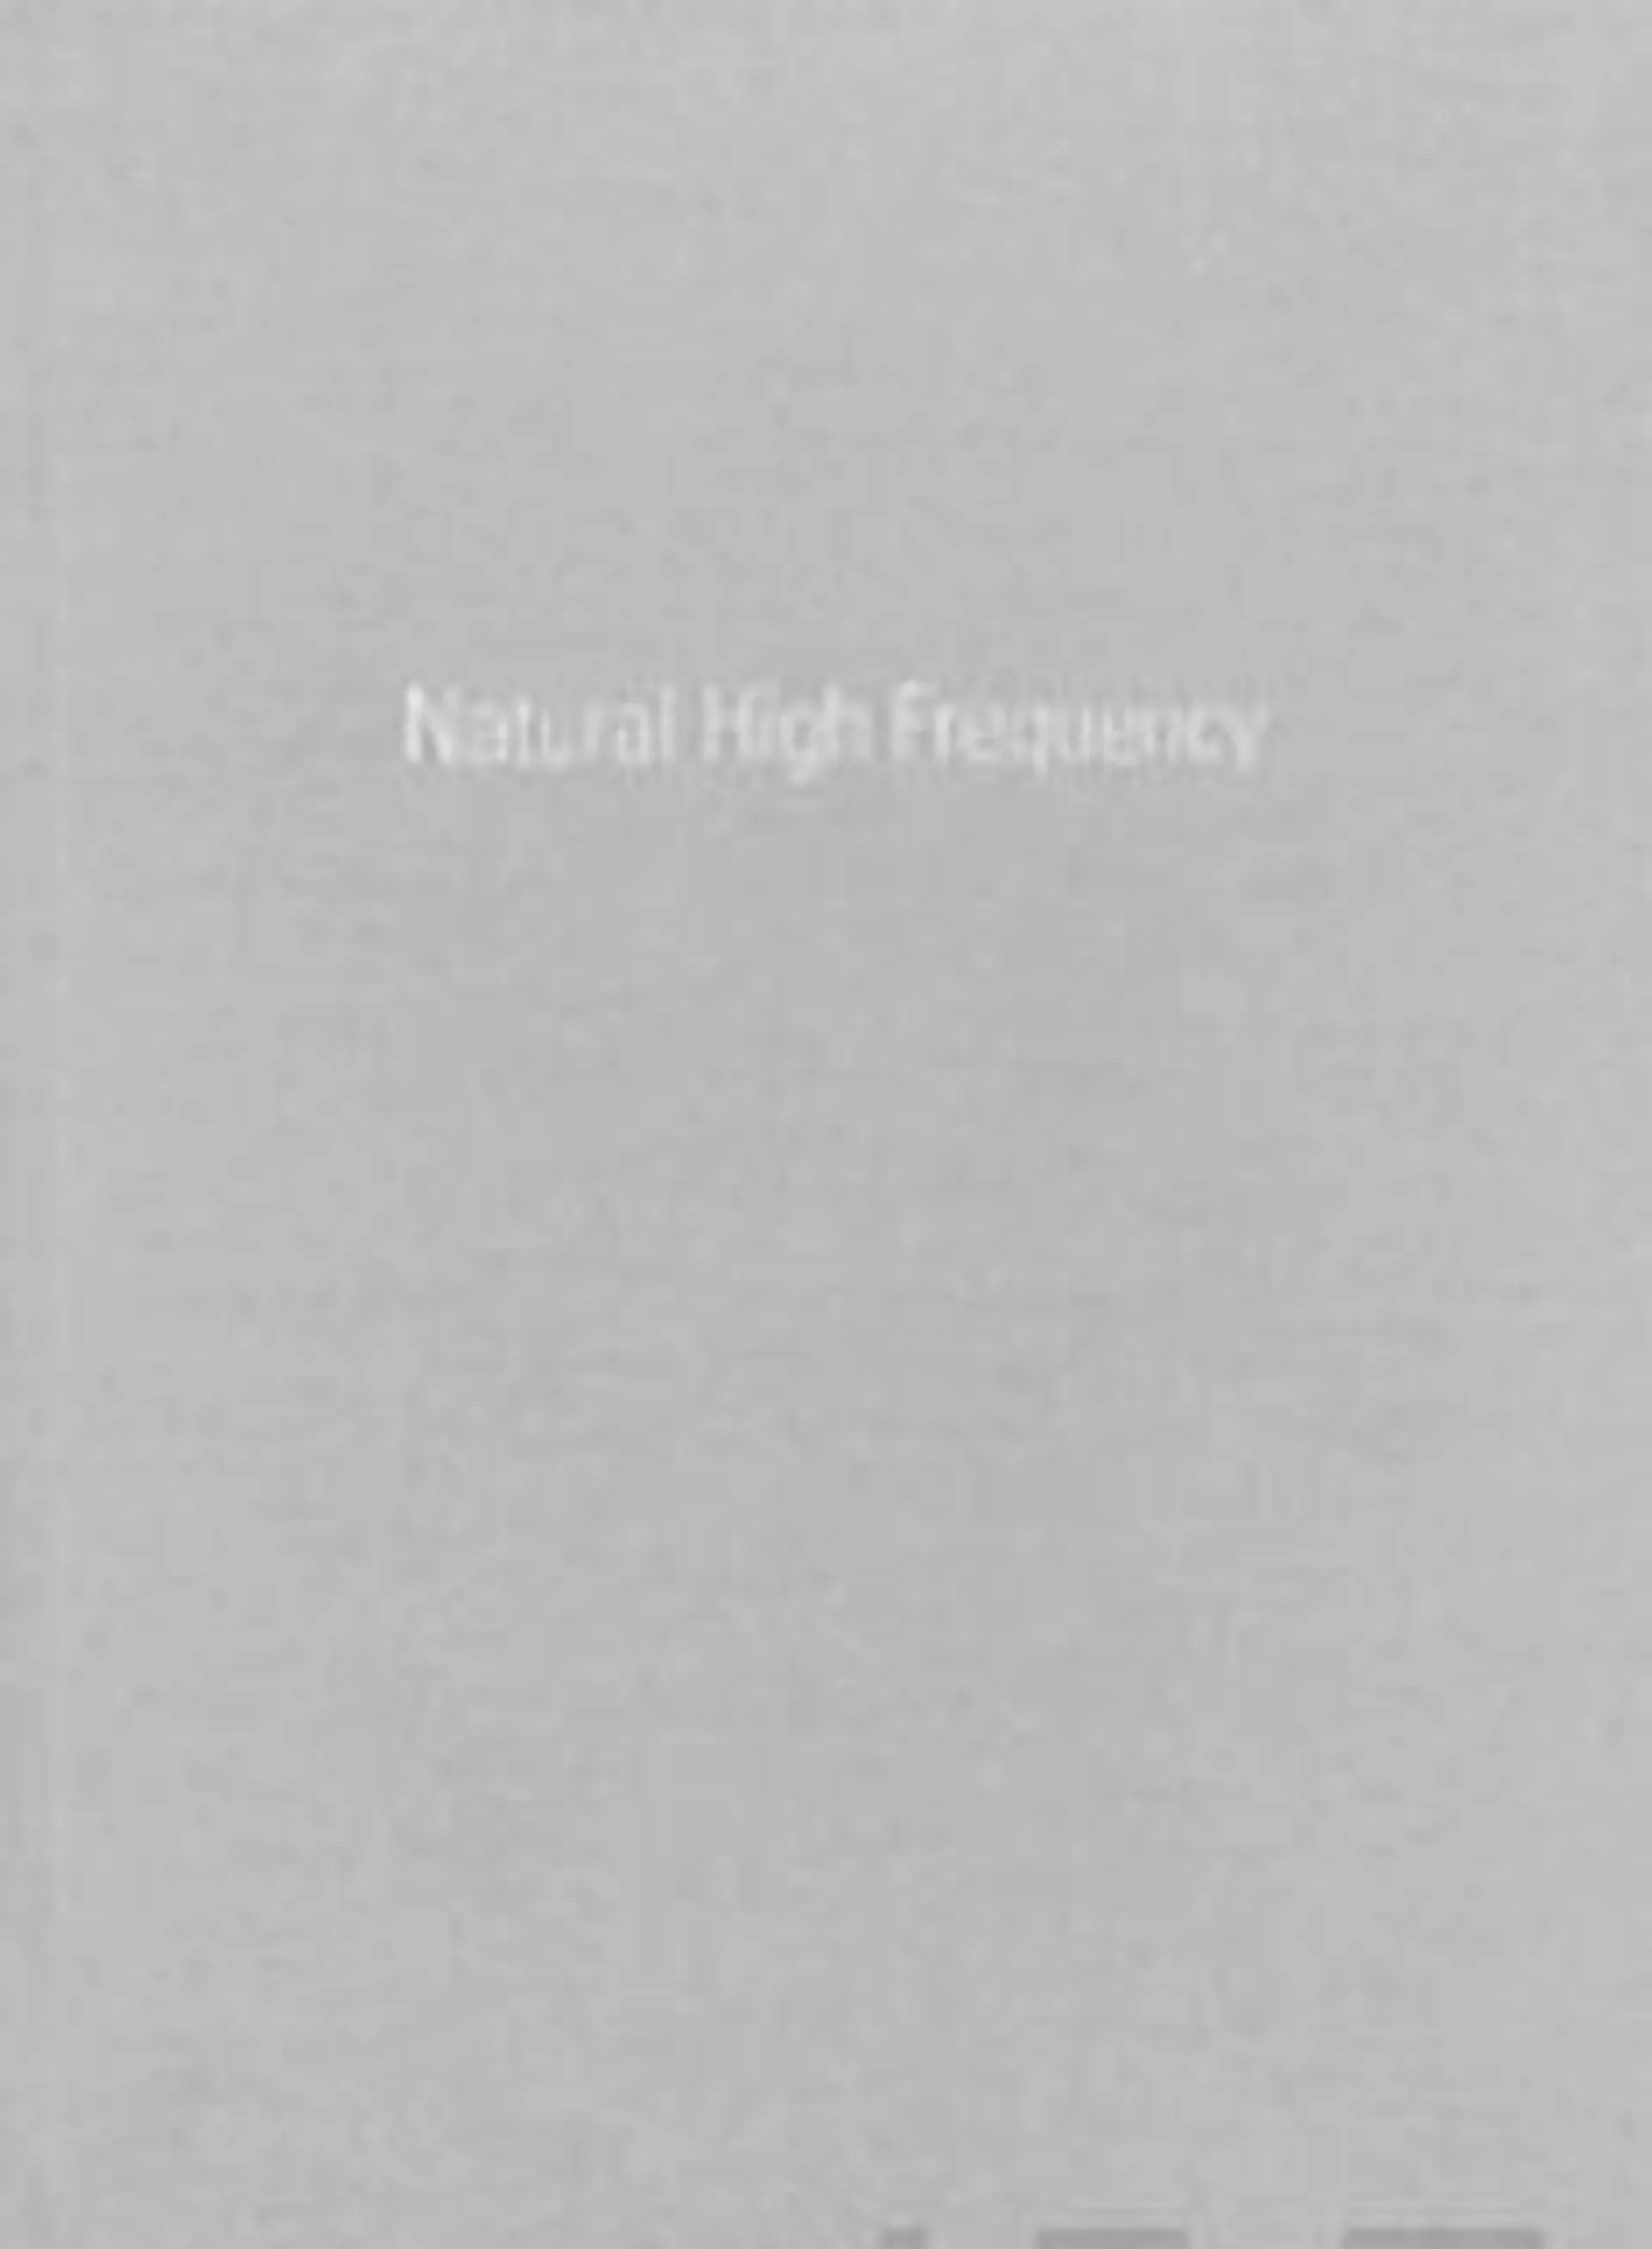 Johansson, Natural High Frequency